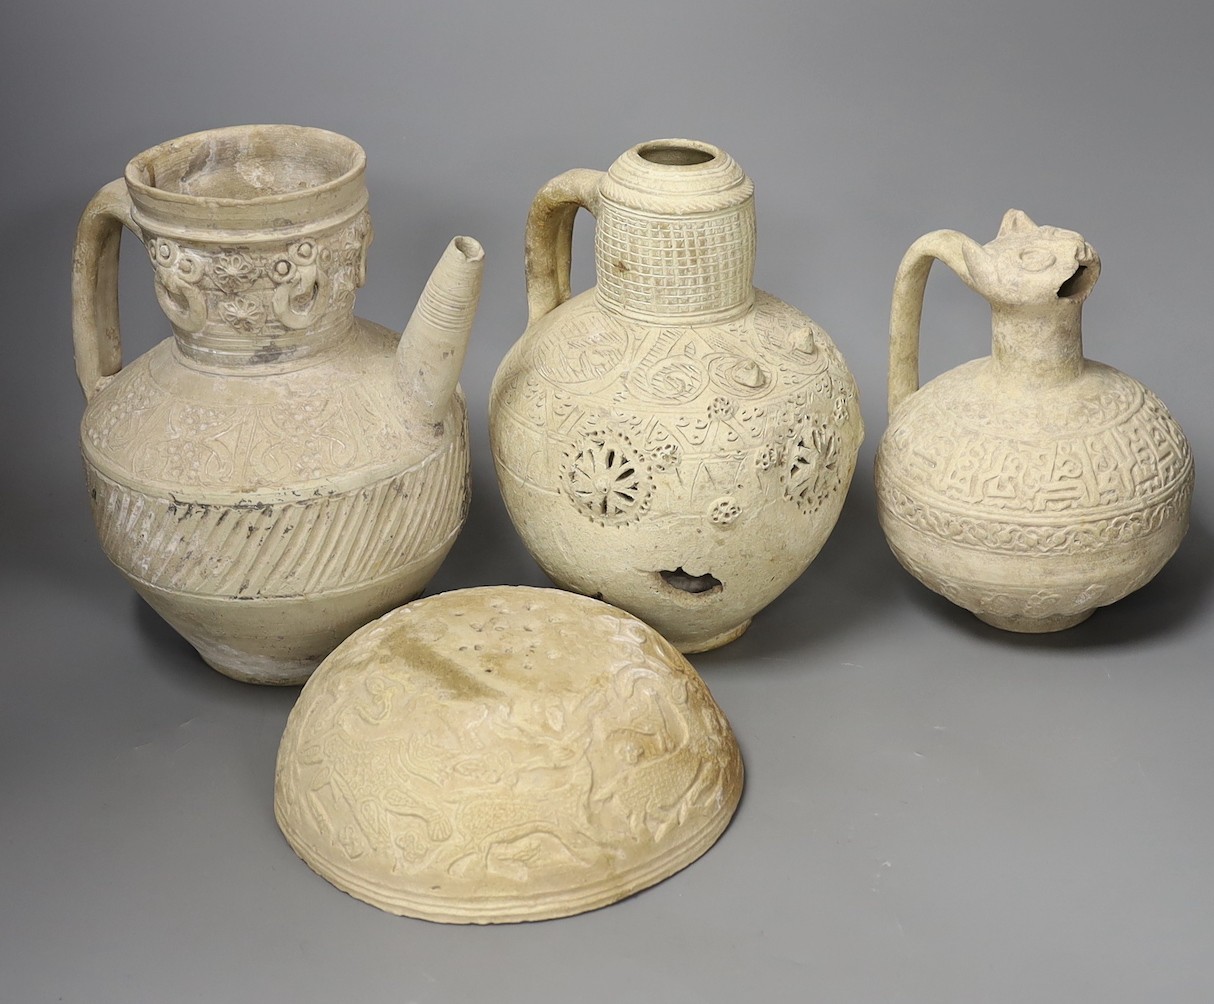 Three Islamic terracotta jugs and a strainer, Middle Eastern, possibly 12th century, tallest 24cm